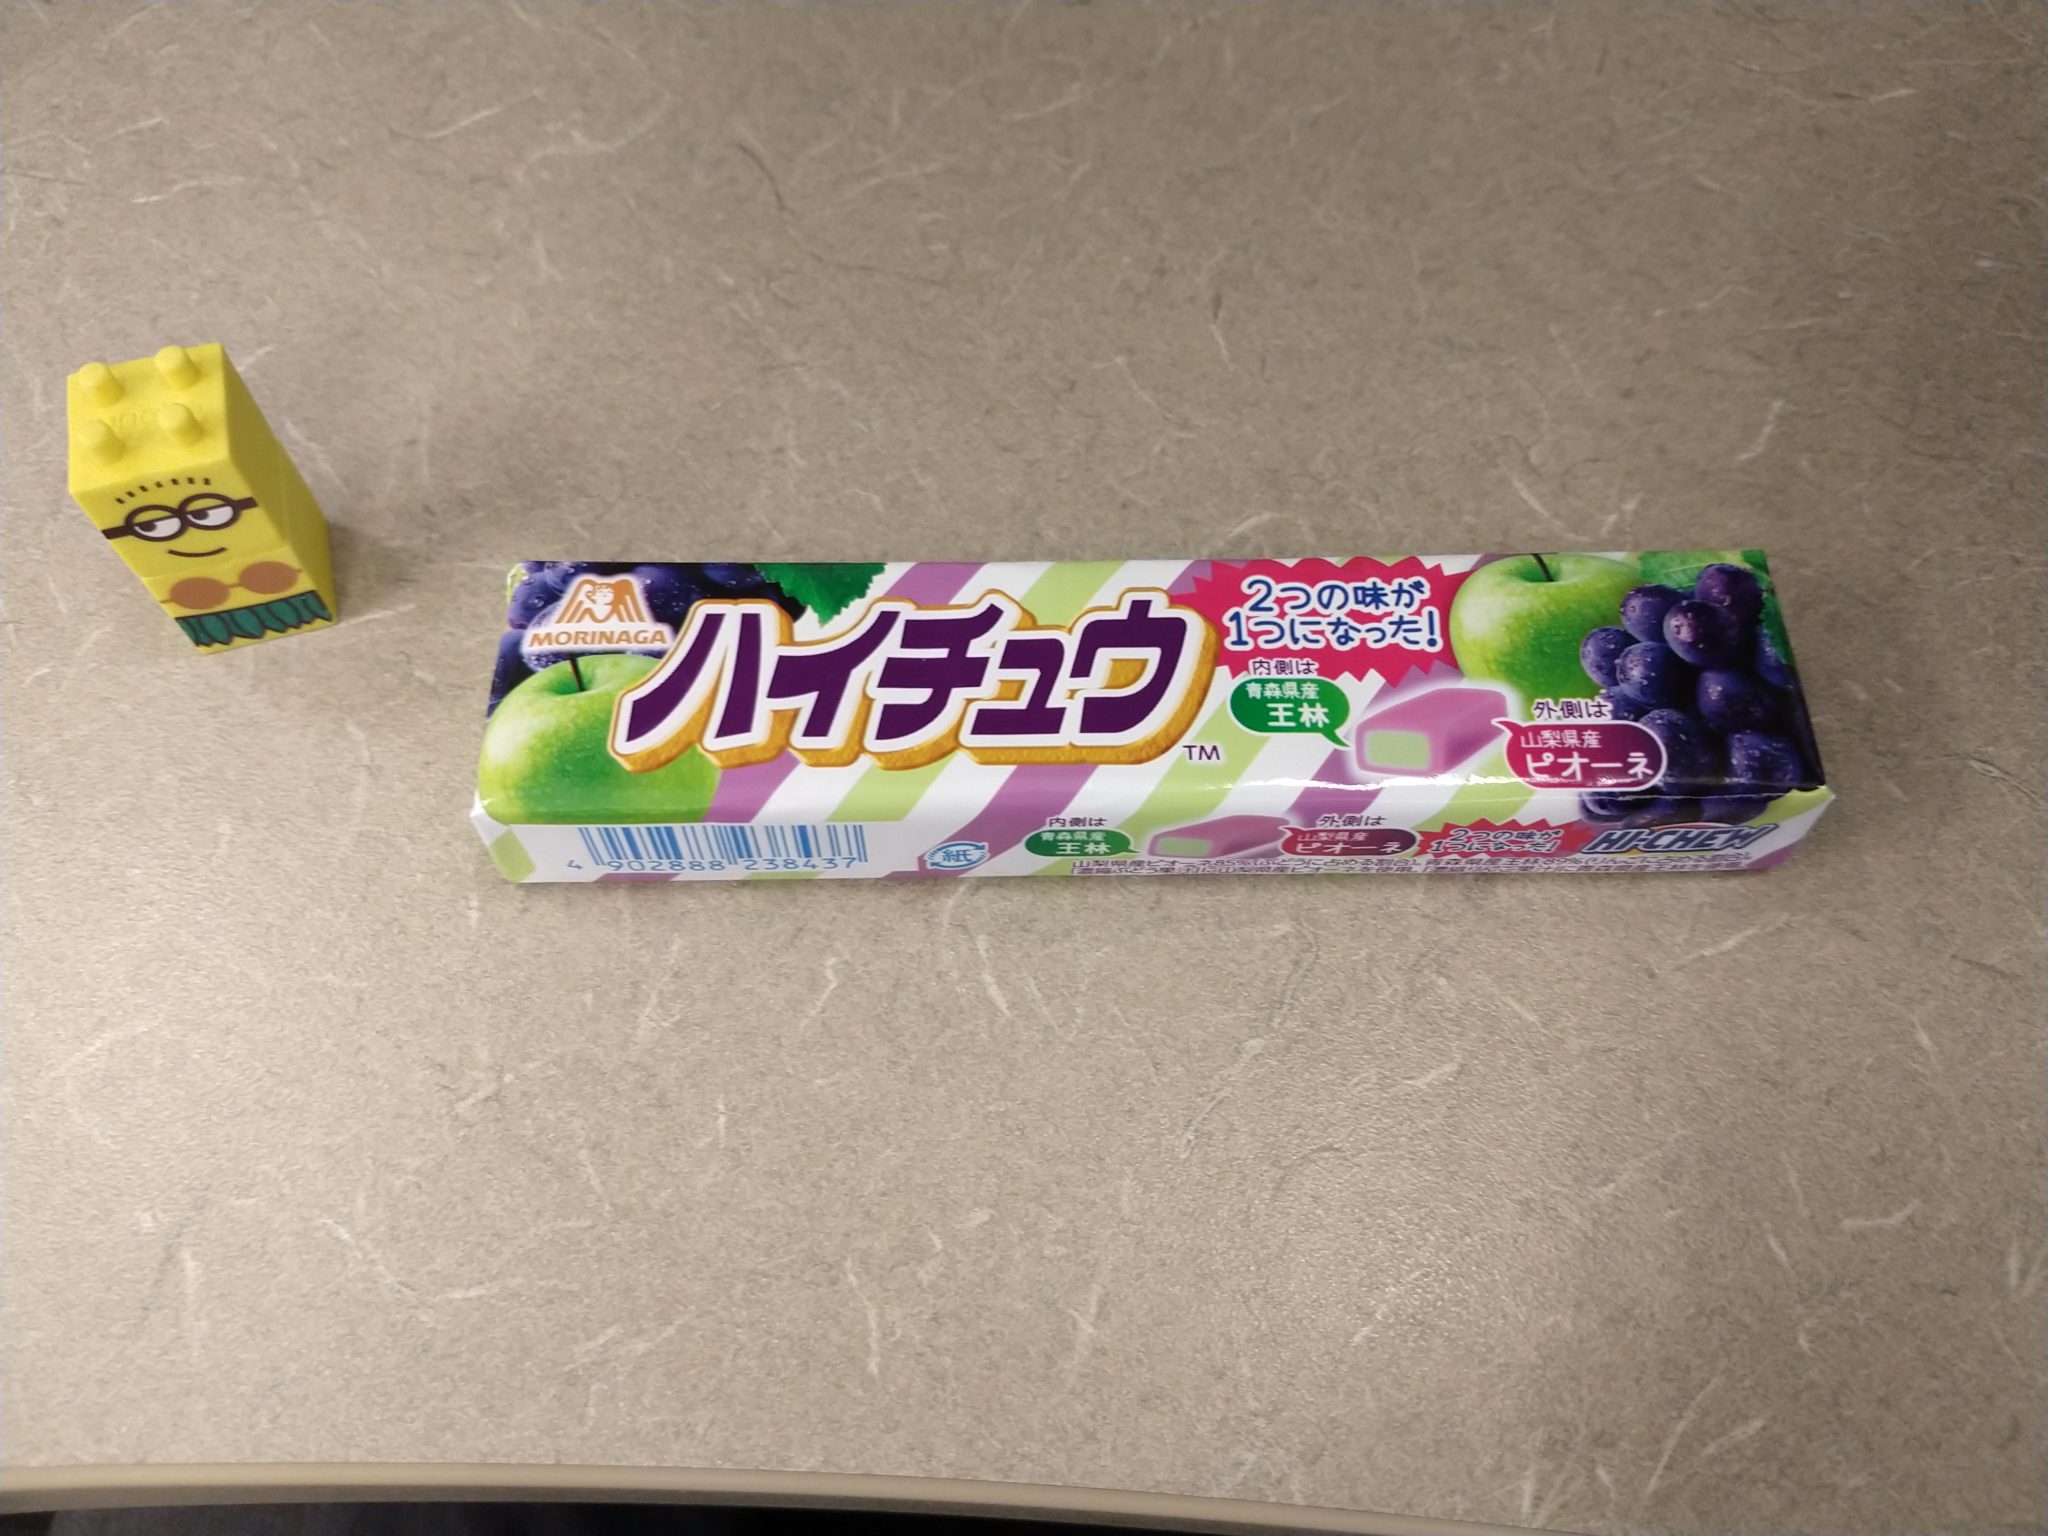 Hi-Chew Doubles – Grape with Apple